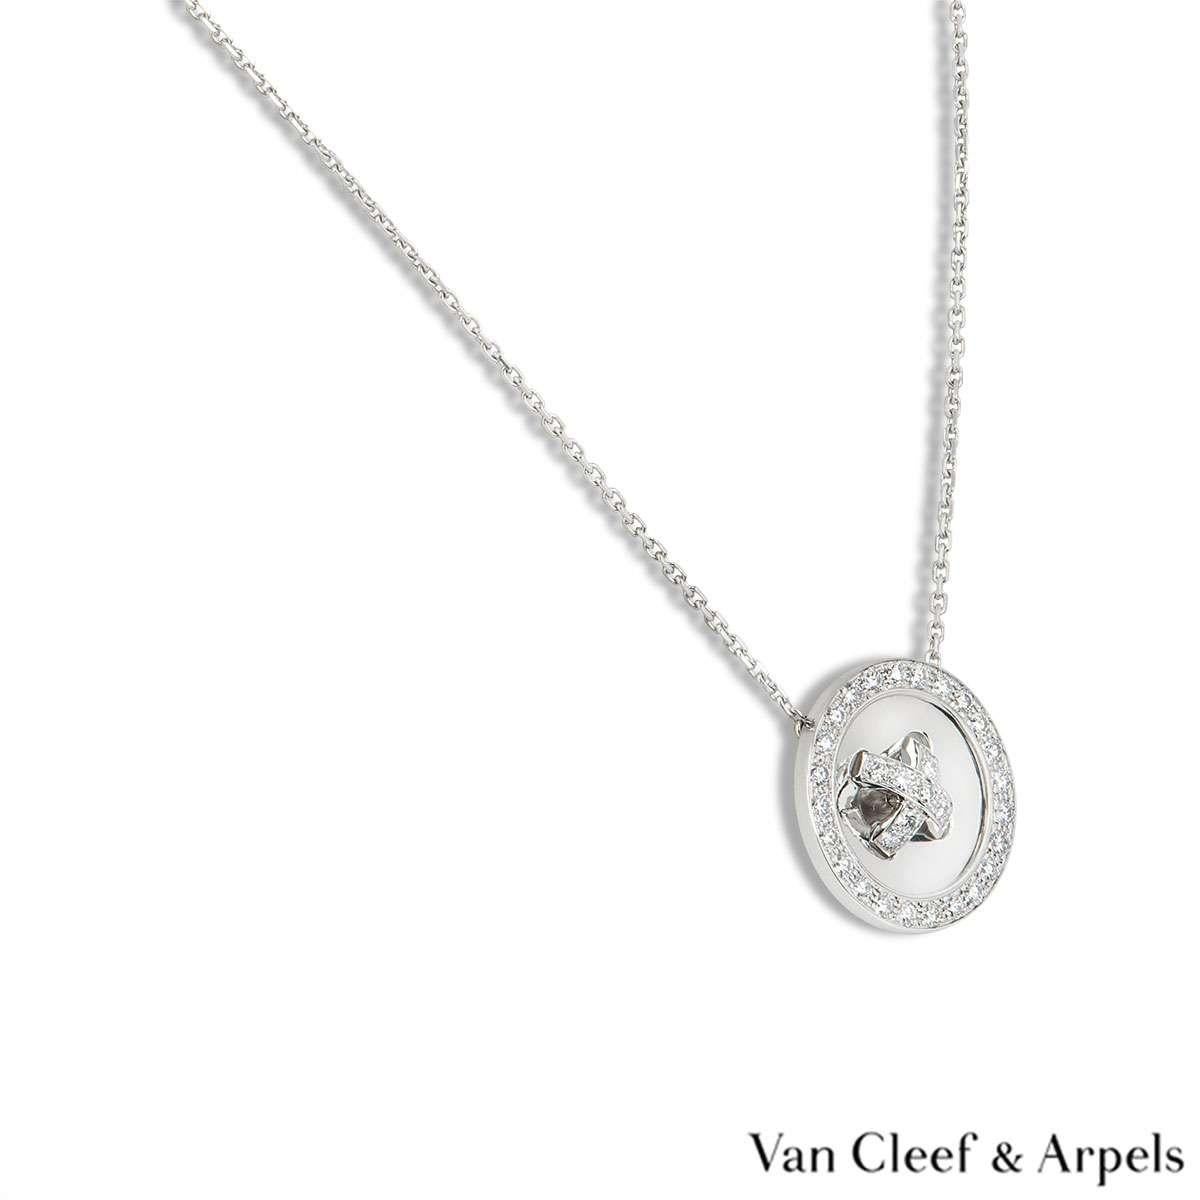 An 18 carat white gold diamond pendant by Van Cleef & Arpels. The pendant is a button motif set with round brilliant cut diamonds in the centre and around the outer edge. There are 33 diamonds with a total weight of approximately 1.00 carats. The